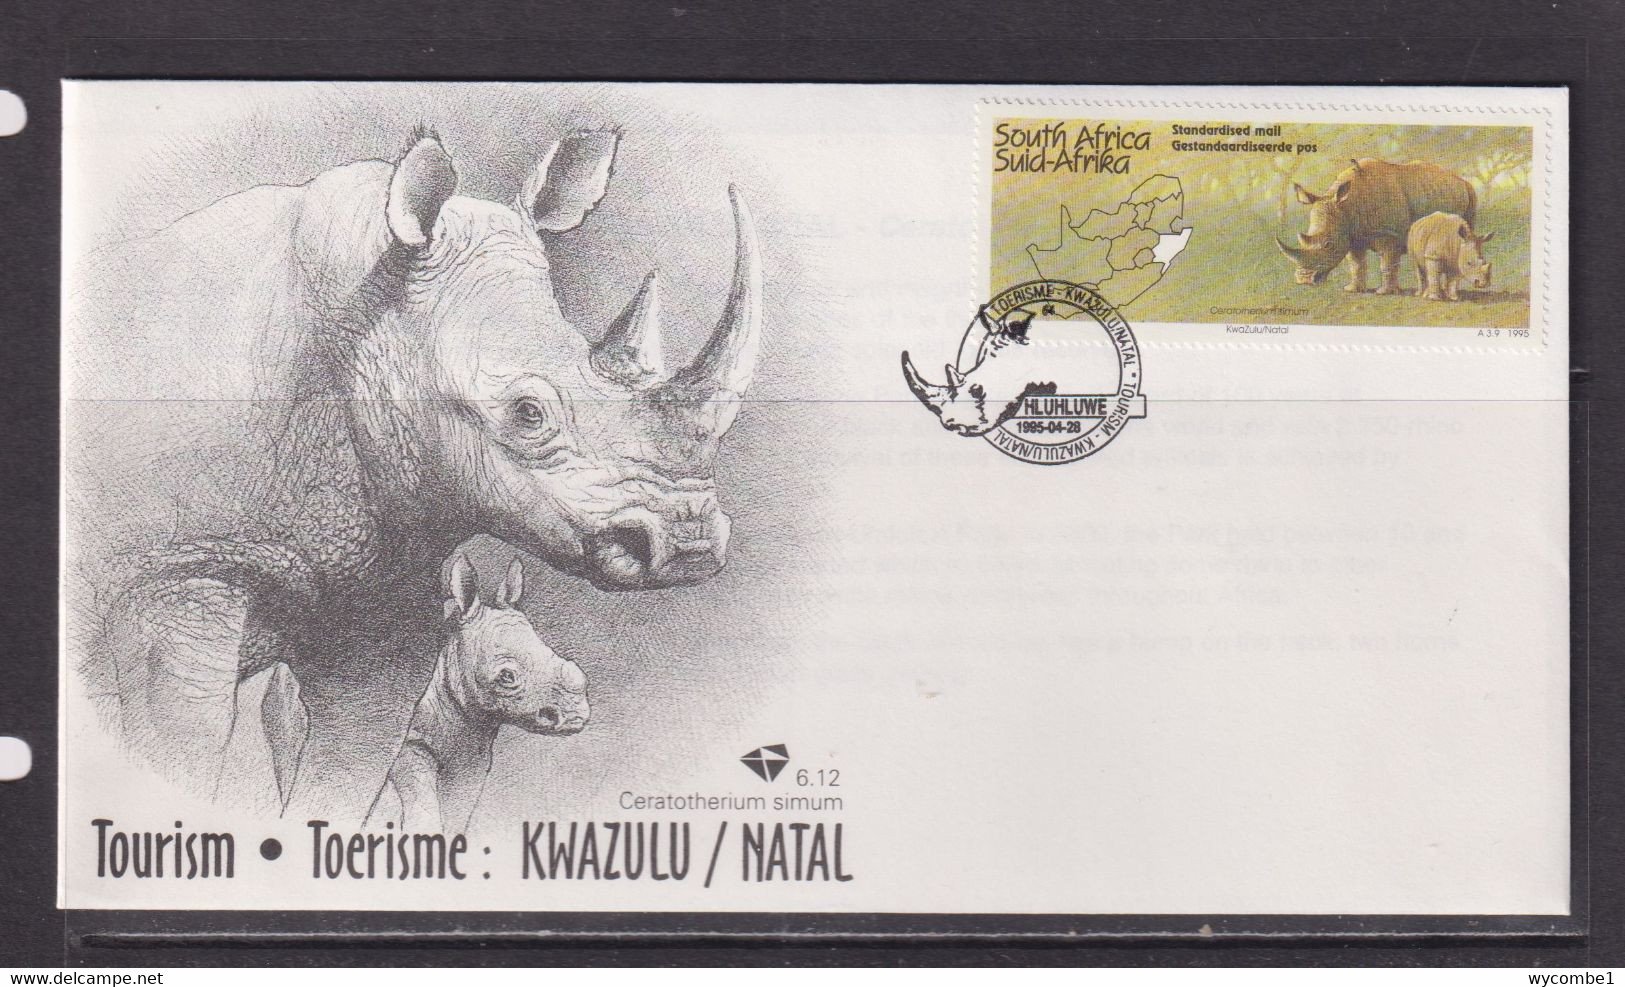 SOUTH AFRICA - 1995 Tourism  FDC - Covers & Documents